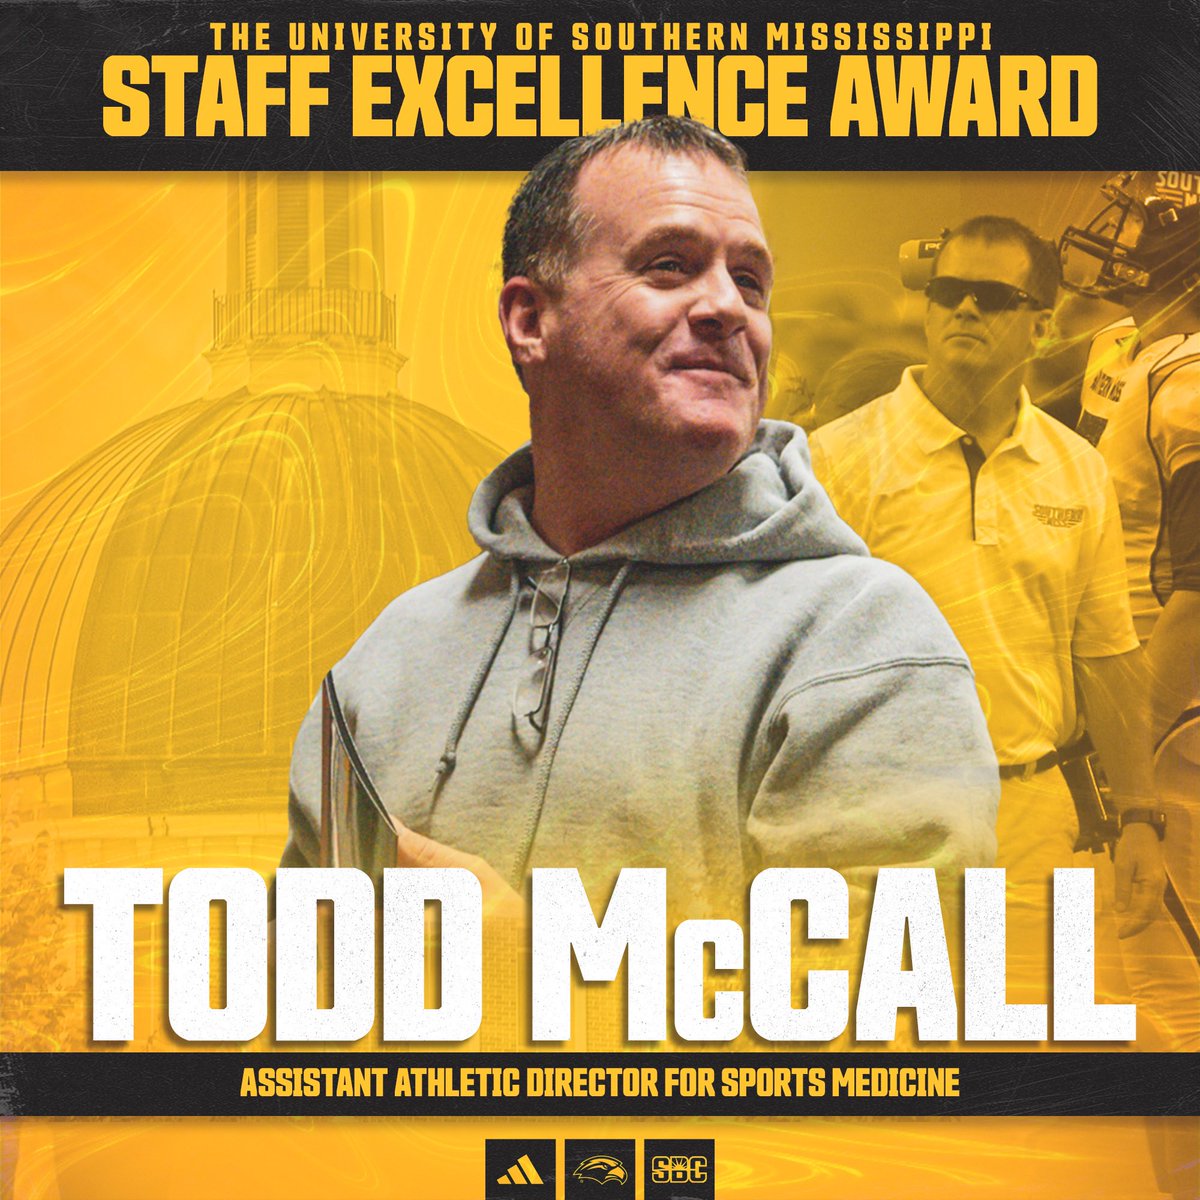 MUCH DESERVED 🏆 Todd McCall, Assistant AD for Sports Medicine, was awarded The University of Southern Mississippi Staff Excellence Award. It was 1 of 7 given this year across the entire campus! #SMTTT